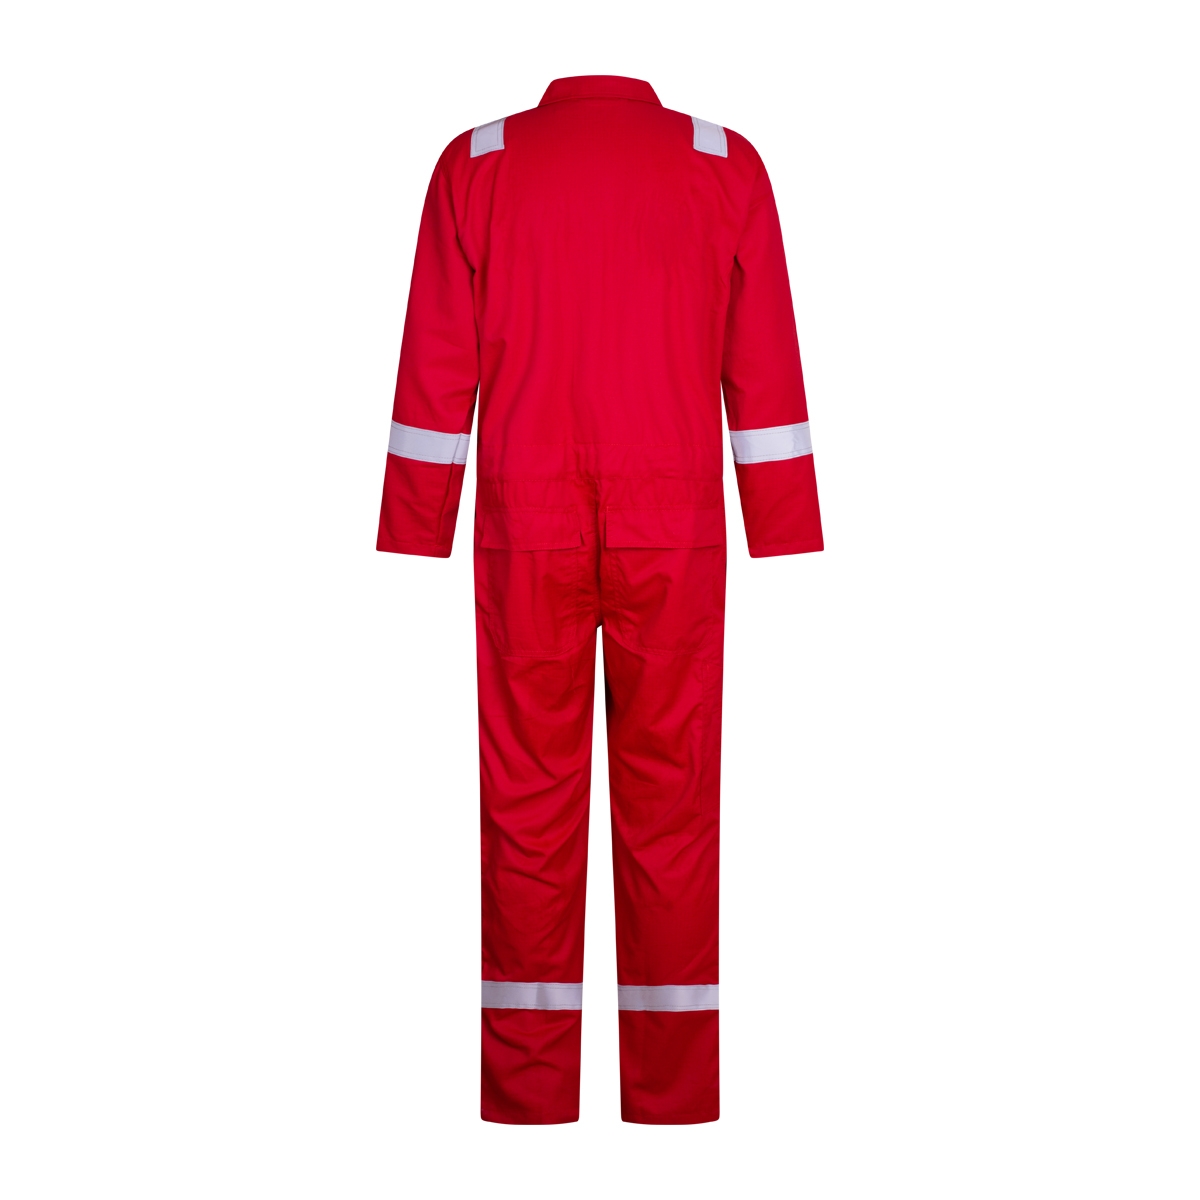 Dapro IFR Coverall – Red back